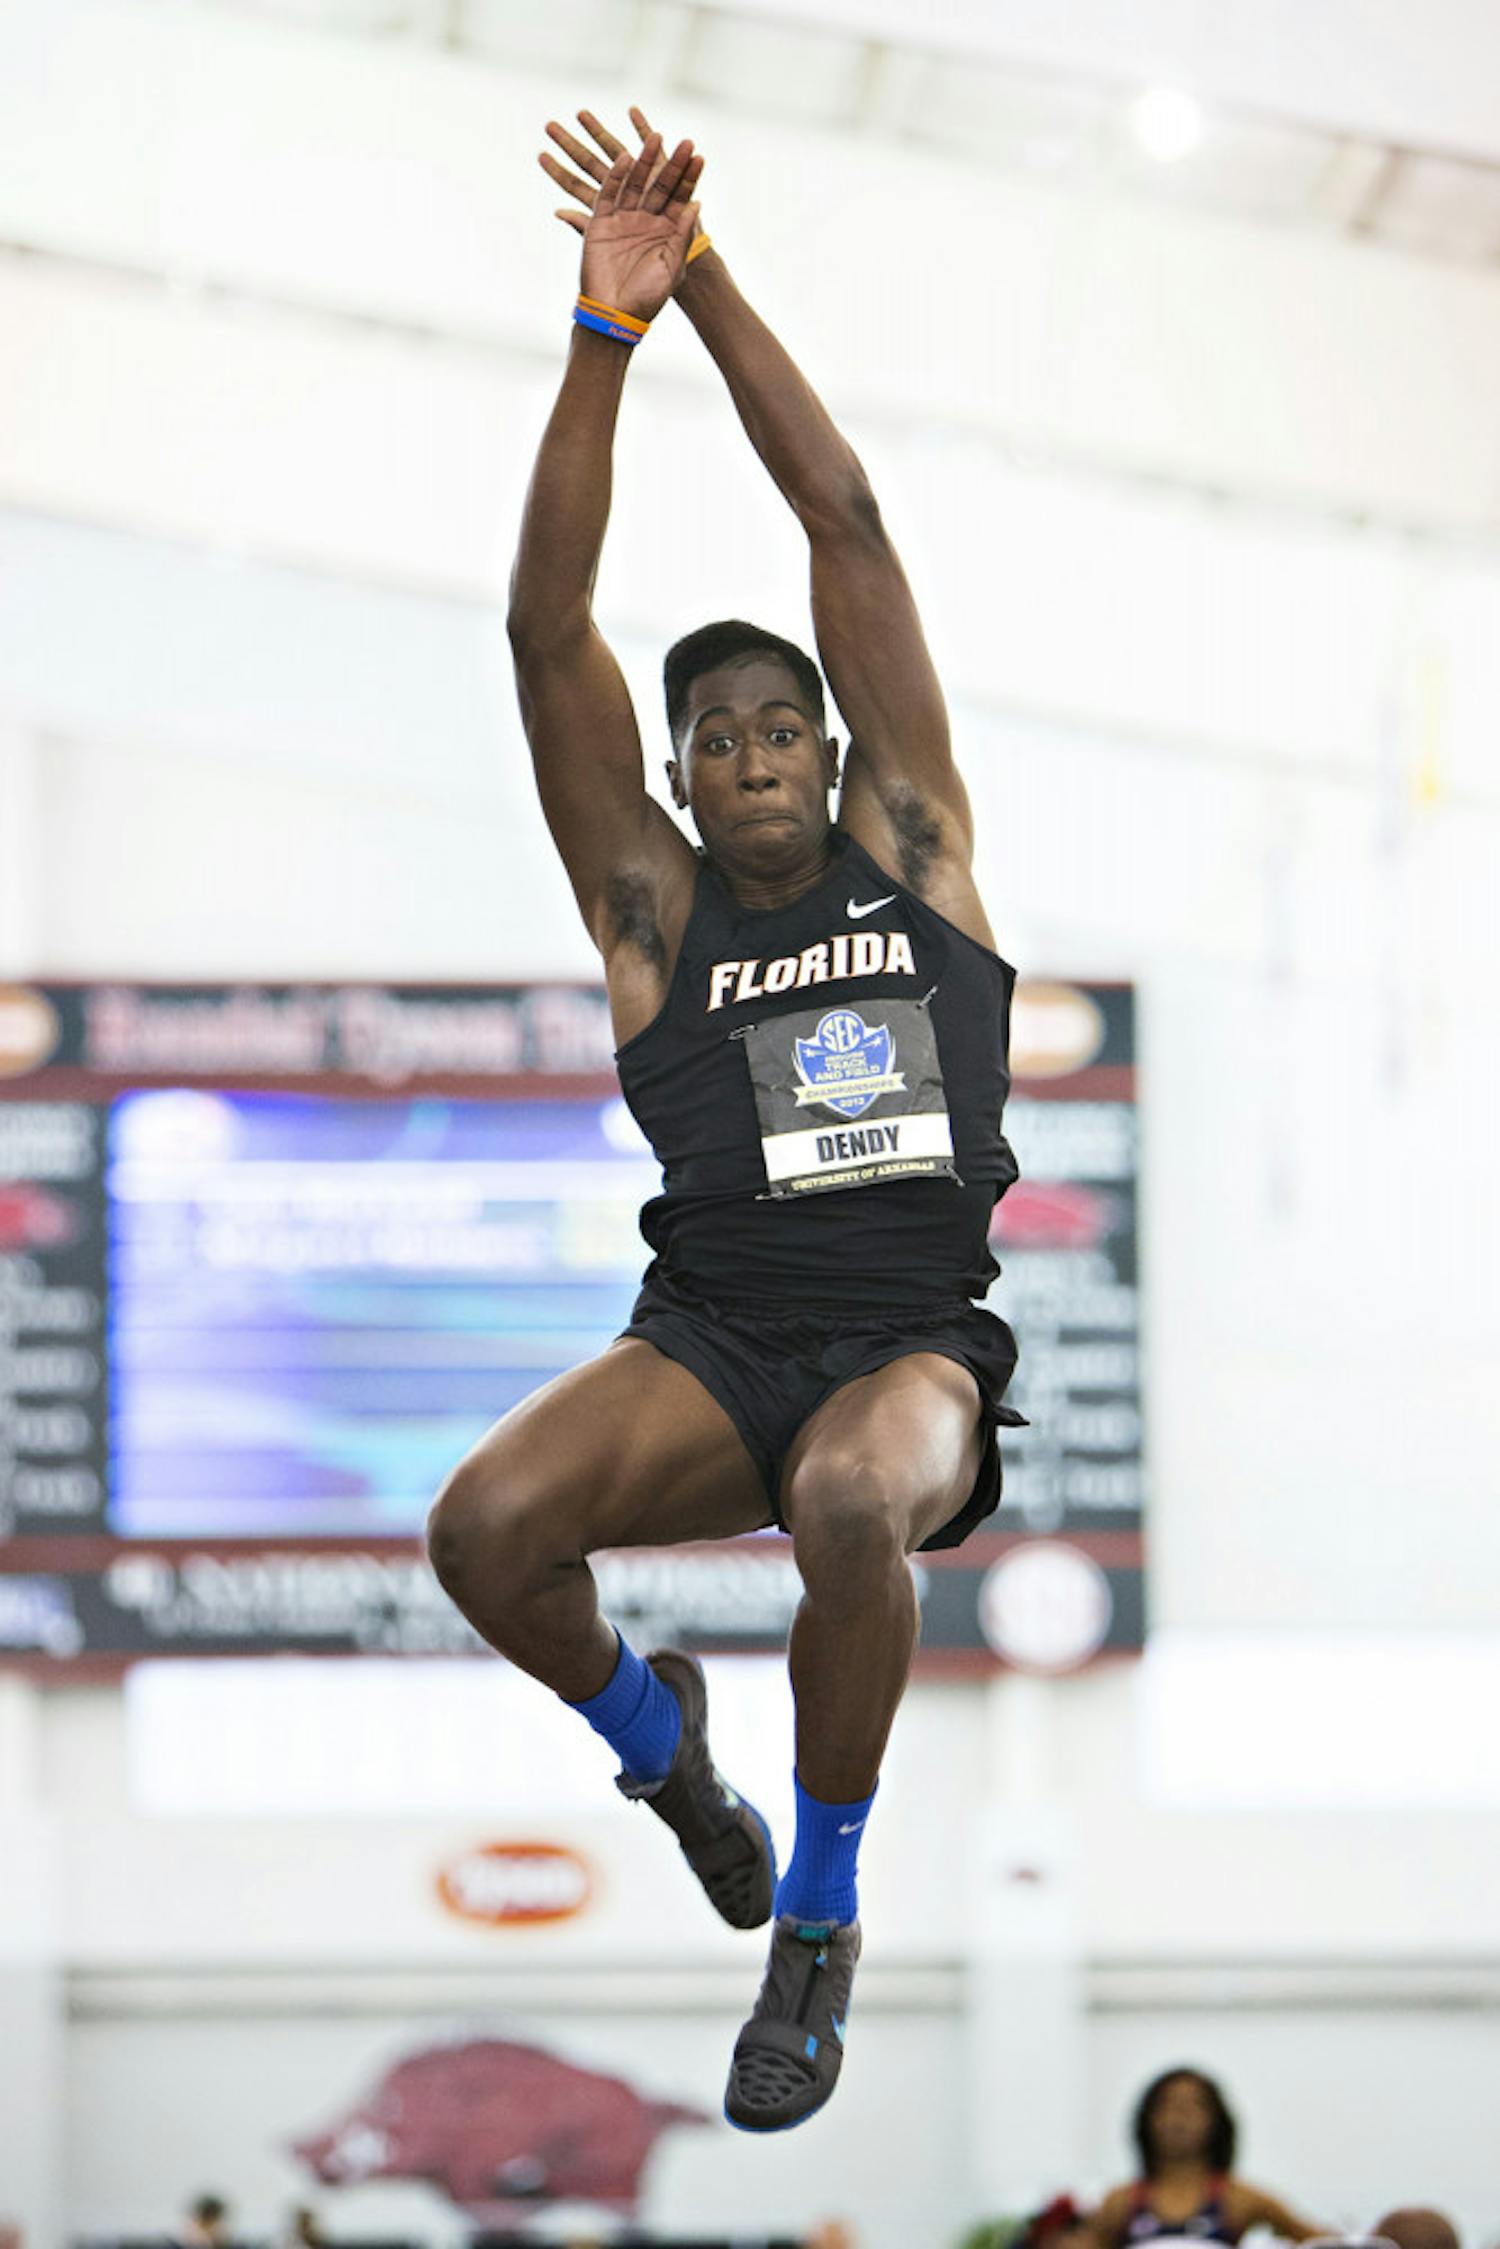 Sophomore jumper Marquis Dendy competes in the long jump at the SEC Indoor Track Championships on Feb. 23 in Fayetteville, Ark. Dendy qualified for the men's triple jump in next week's NCAA Outdoors Championships.